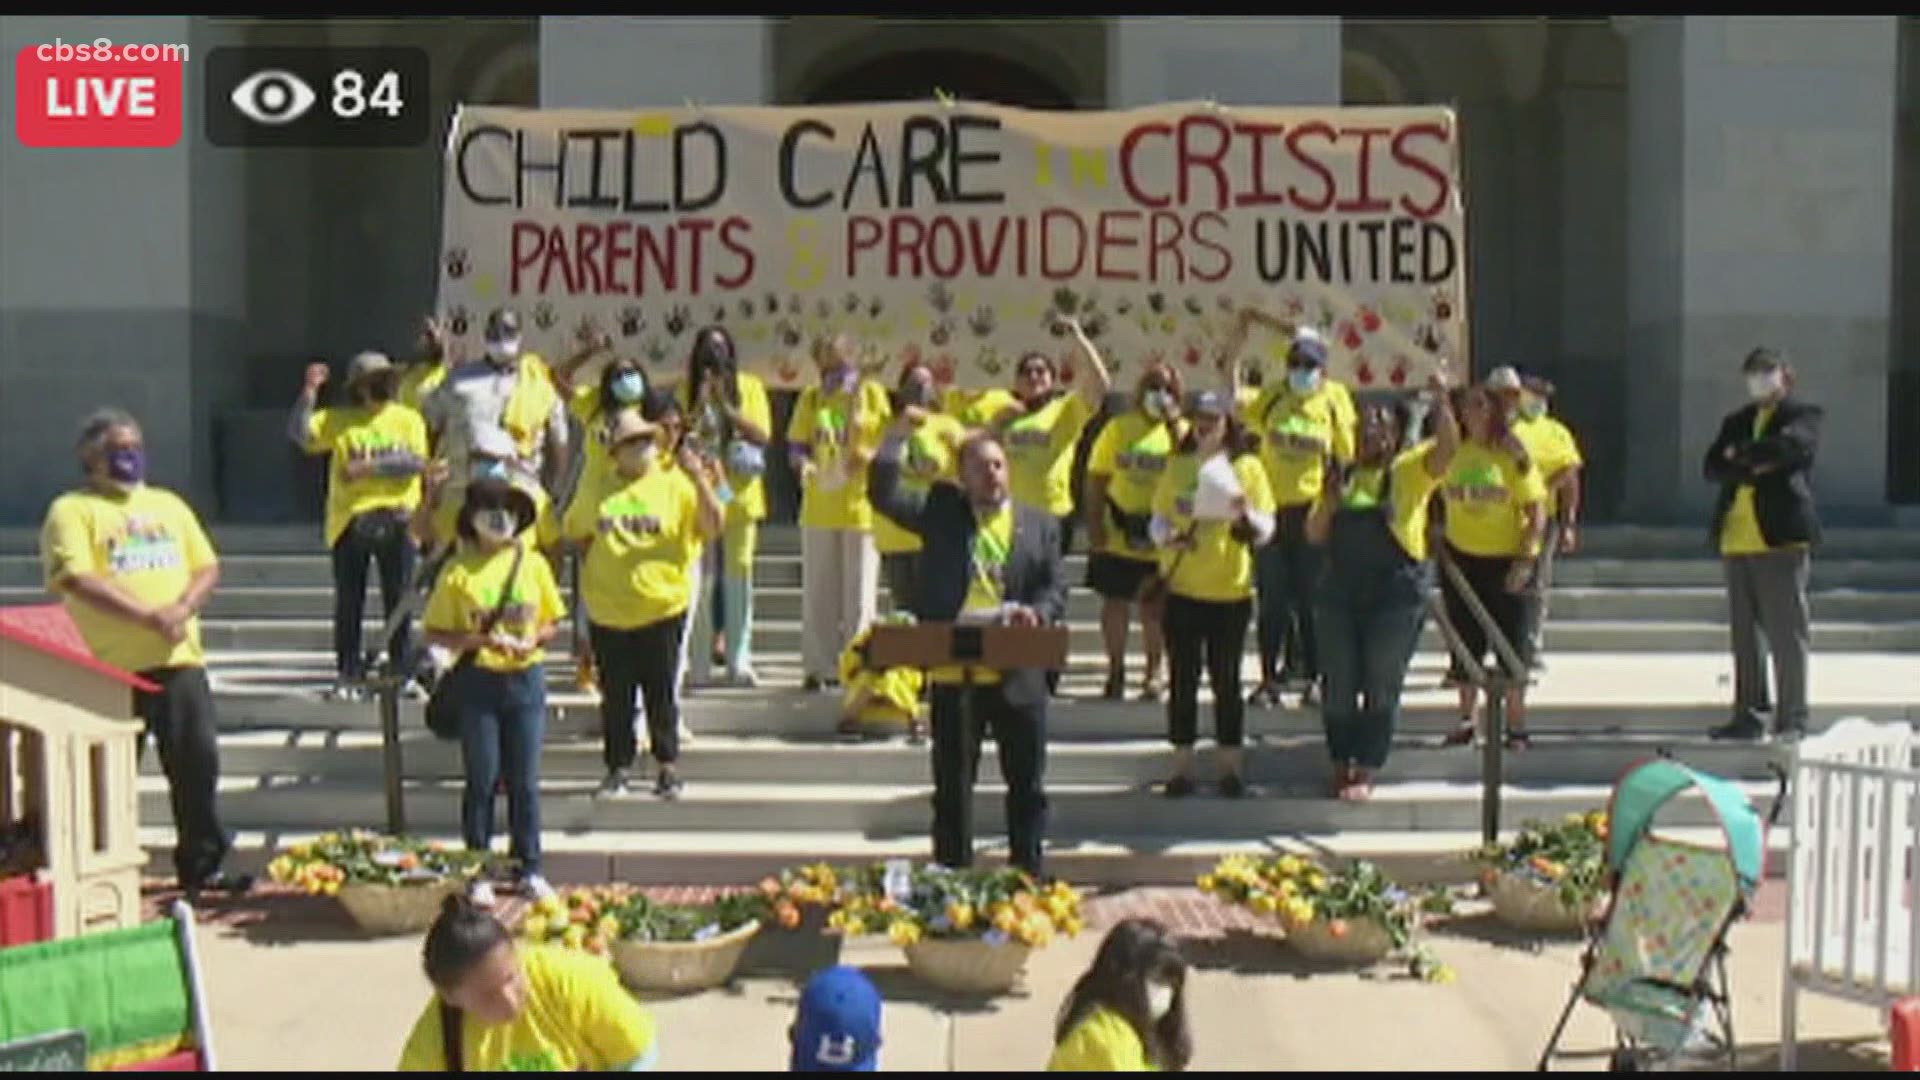 In Sacramento, the largest daycare workers union in California rallied on the steps of the capitol urging Governor Gavin Newsom to raise child care rates.